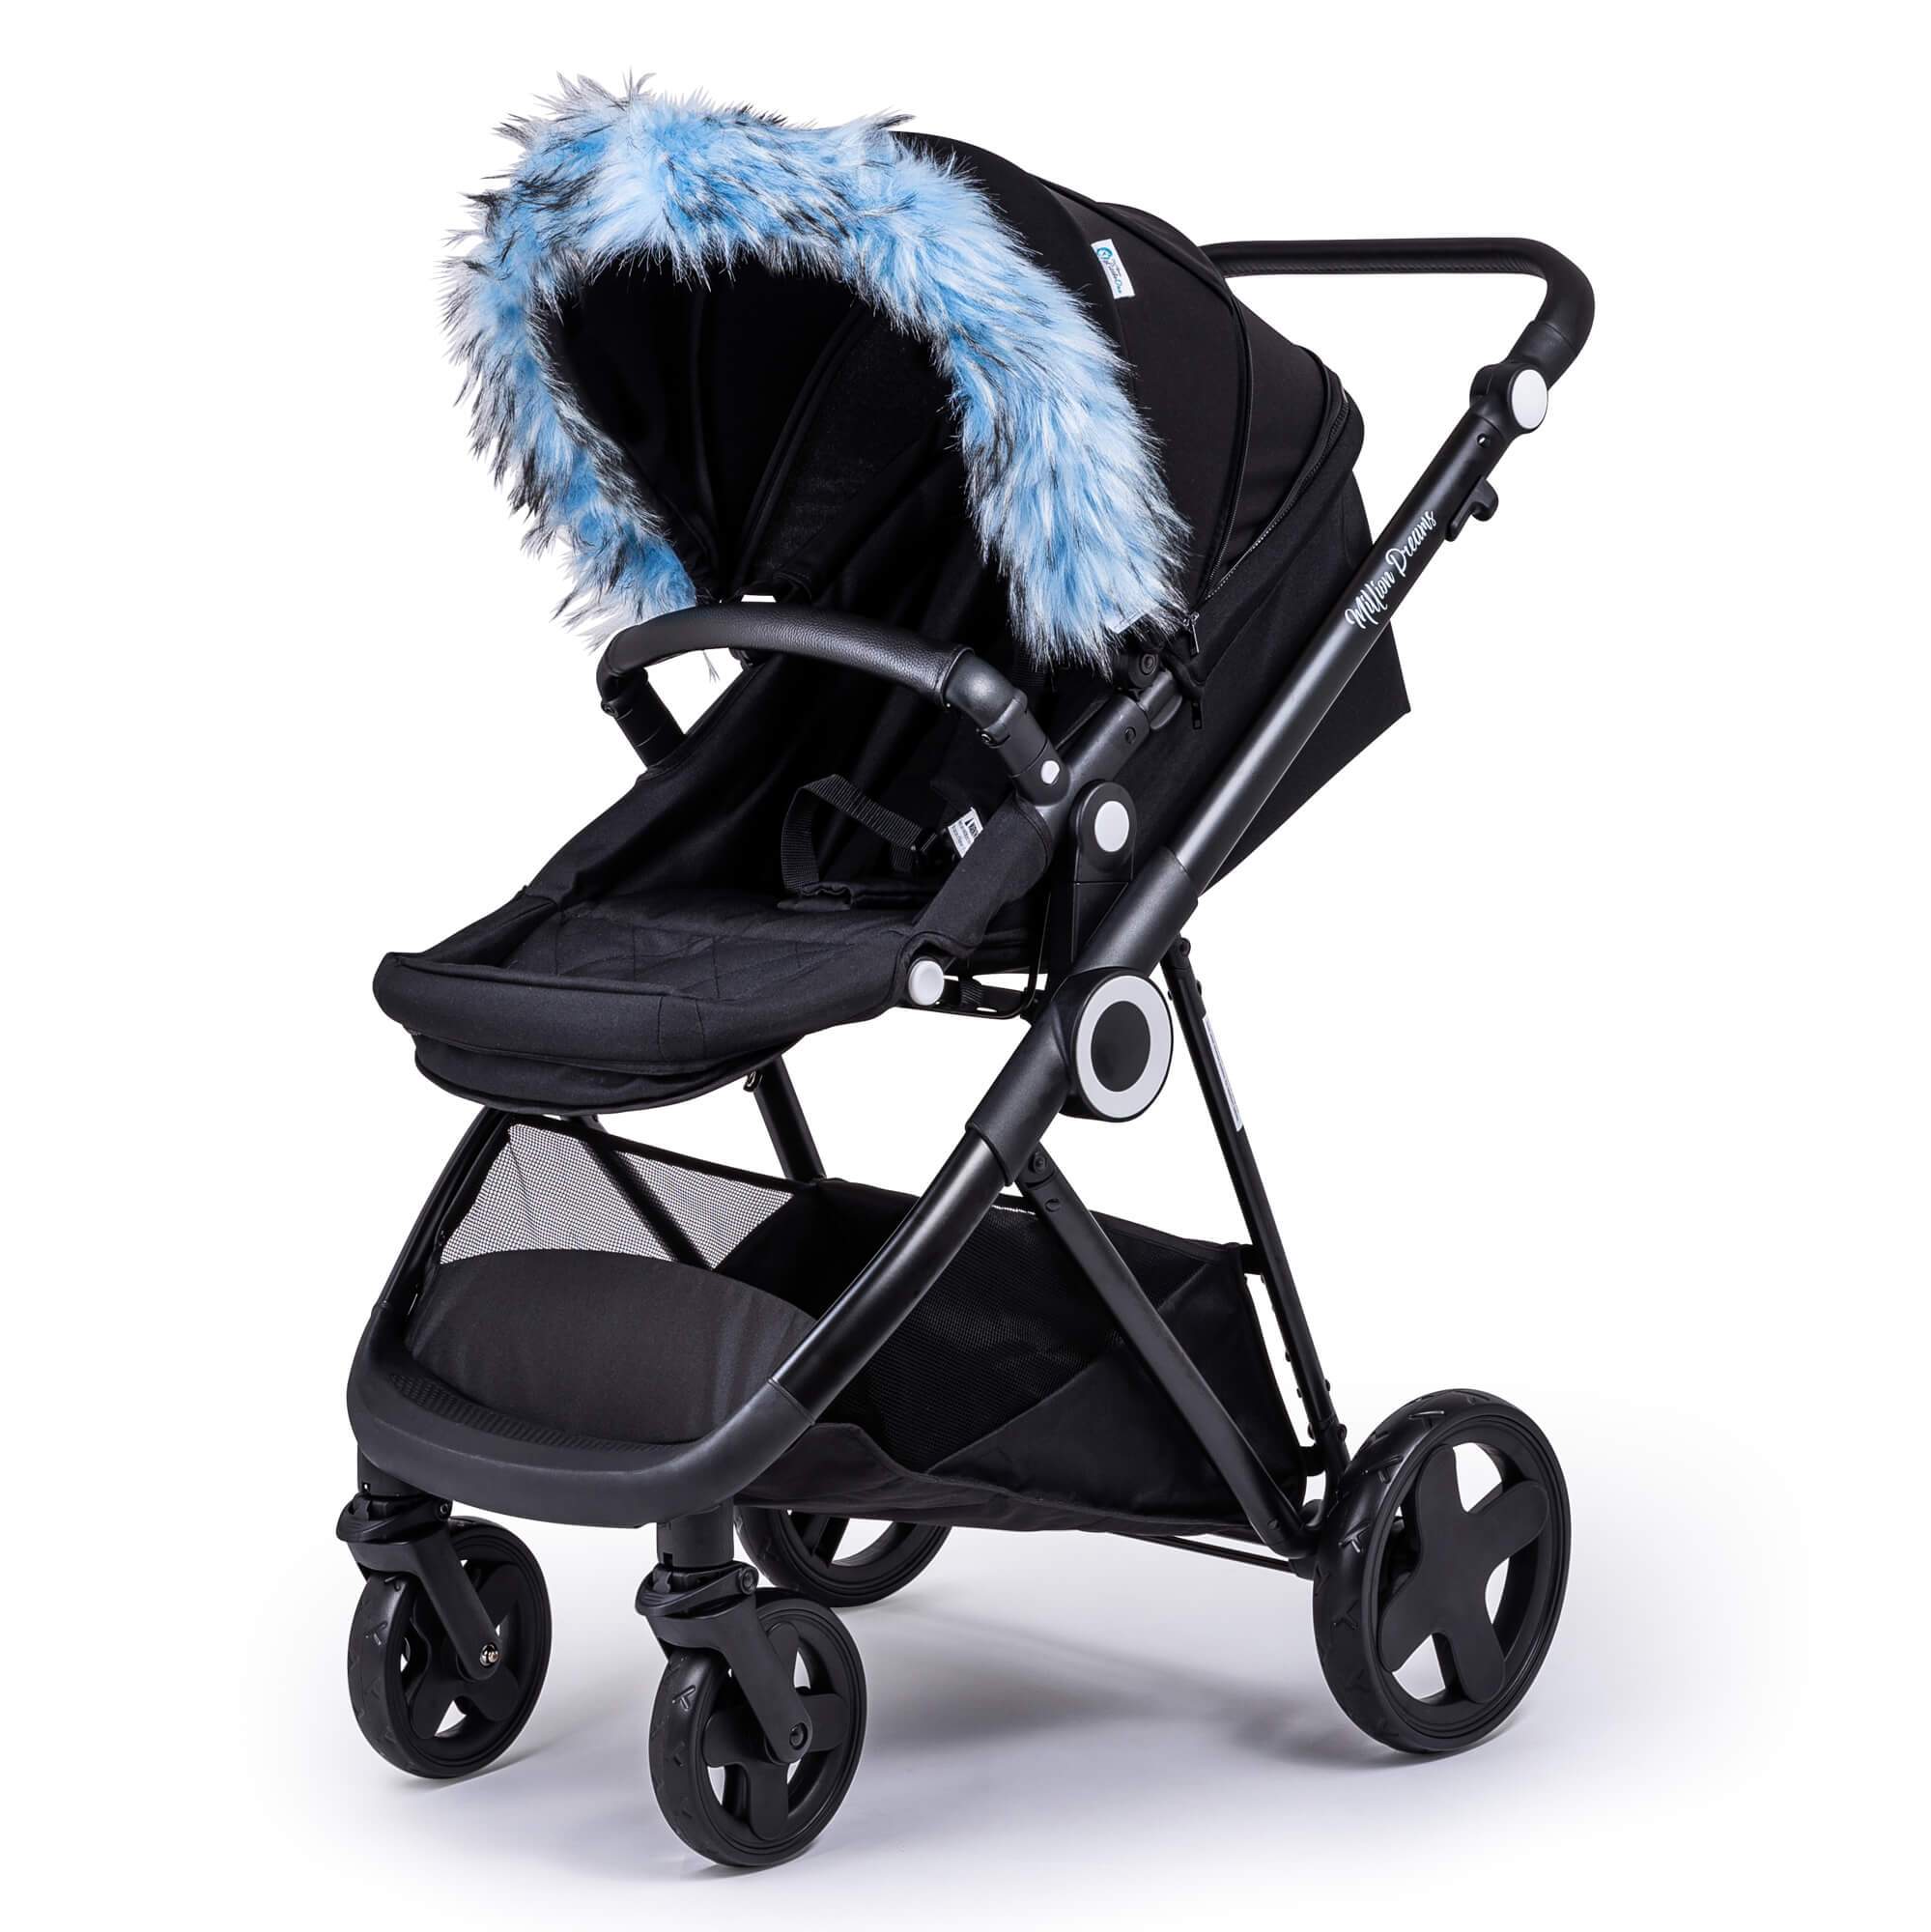 Pram Fur Hood Trim Attachment for Pushchair Compatible with Greentom - Light Blue / Fits All Models | For Your Little One